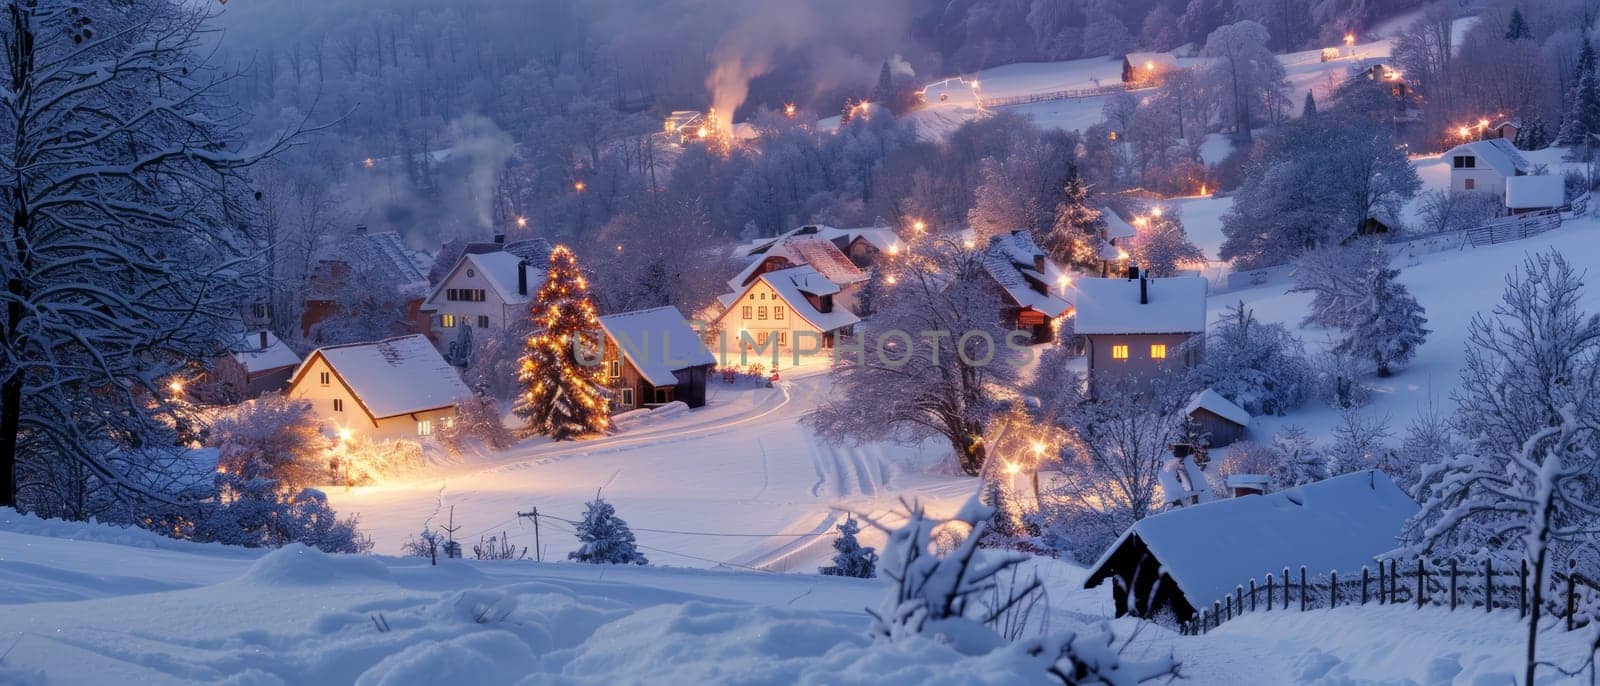 A picturesque village is bathed in the warm glow of Christmas lights, nestled under a thick blanket of snow during a tranquil winter evening.. by sfinks